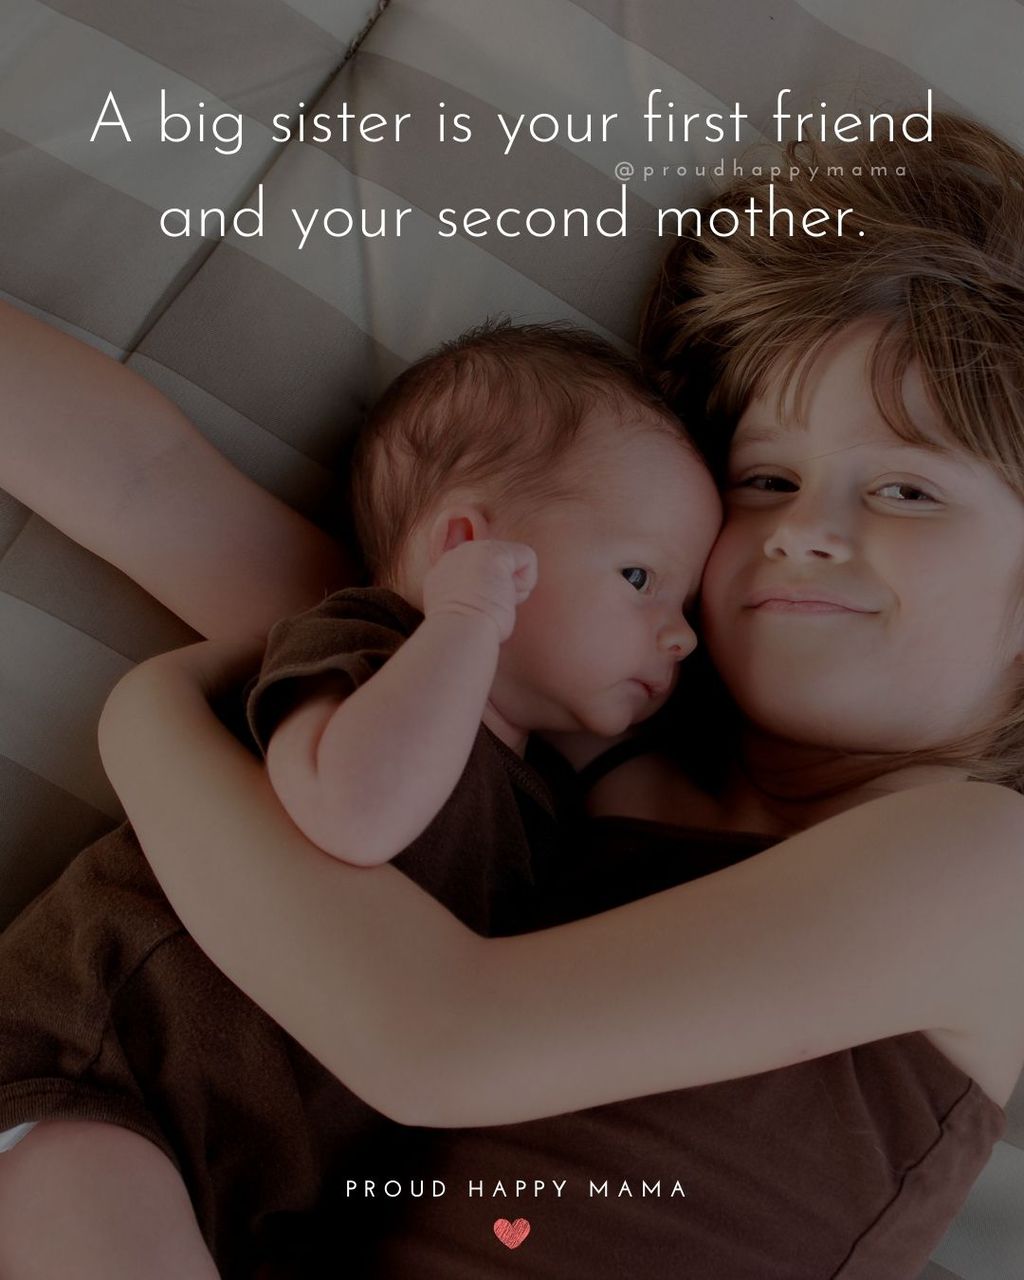 Sister Quotes - A big sister is your first friend and your second mother.